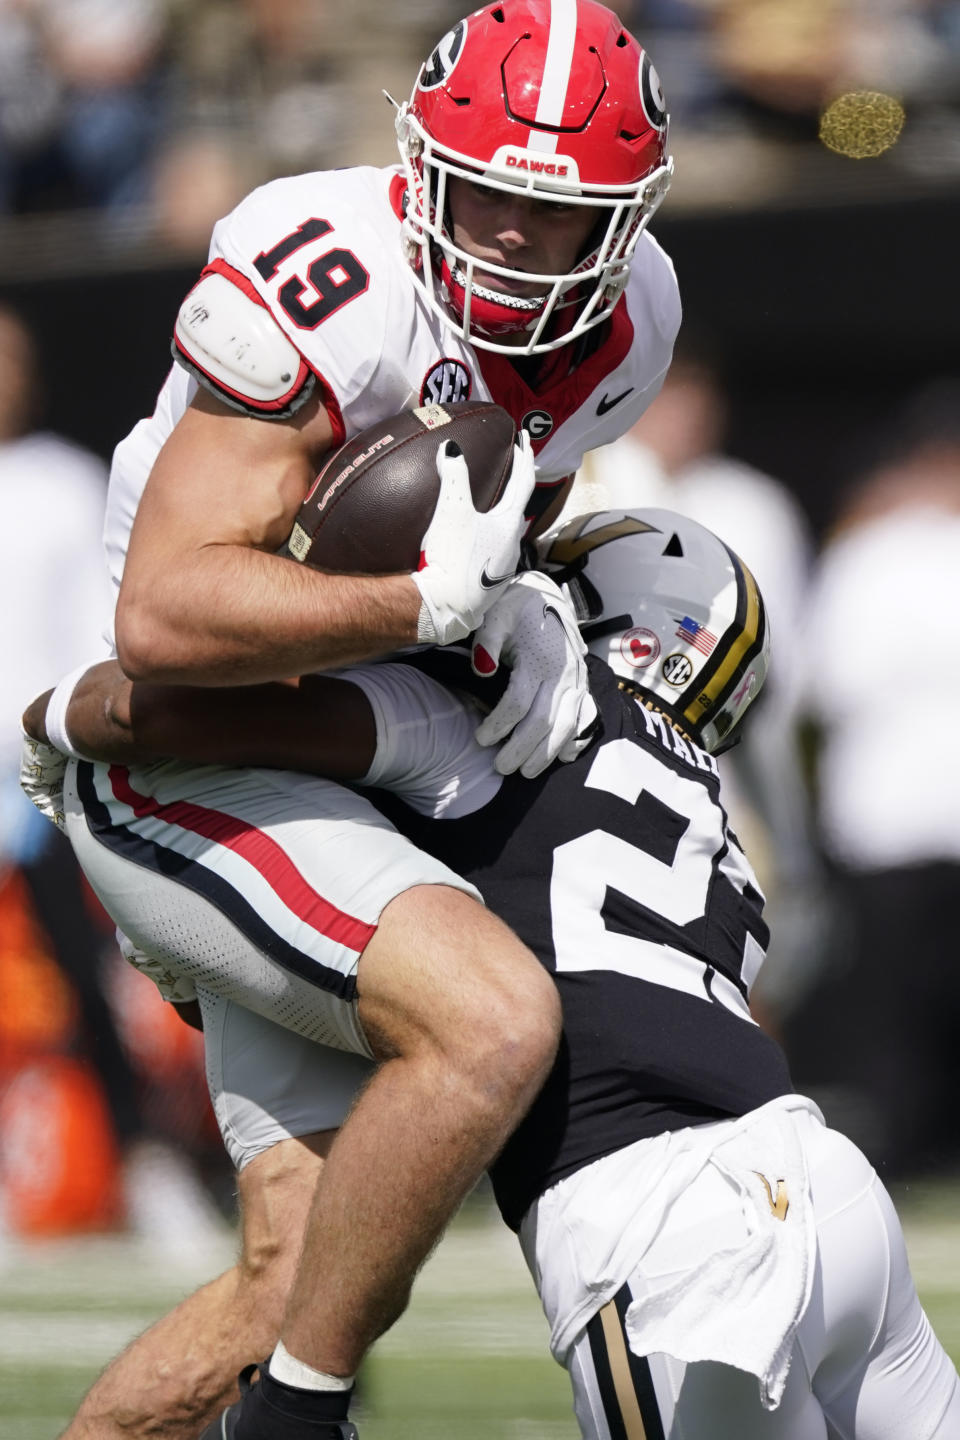 Georgia tight end Brock Bowers (19) is tackled by Vanderbilt defensive back Jaylen Mahoney (23) after a catch in the first half of an NCAA college football game Saturday, Oct. 14, 2023, in Nashville, Tenn. (AP Photo/George Walker IV)